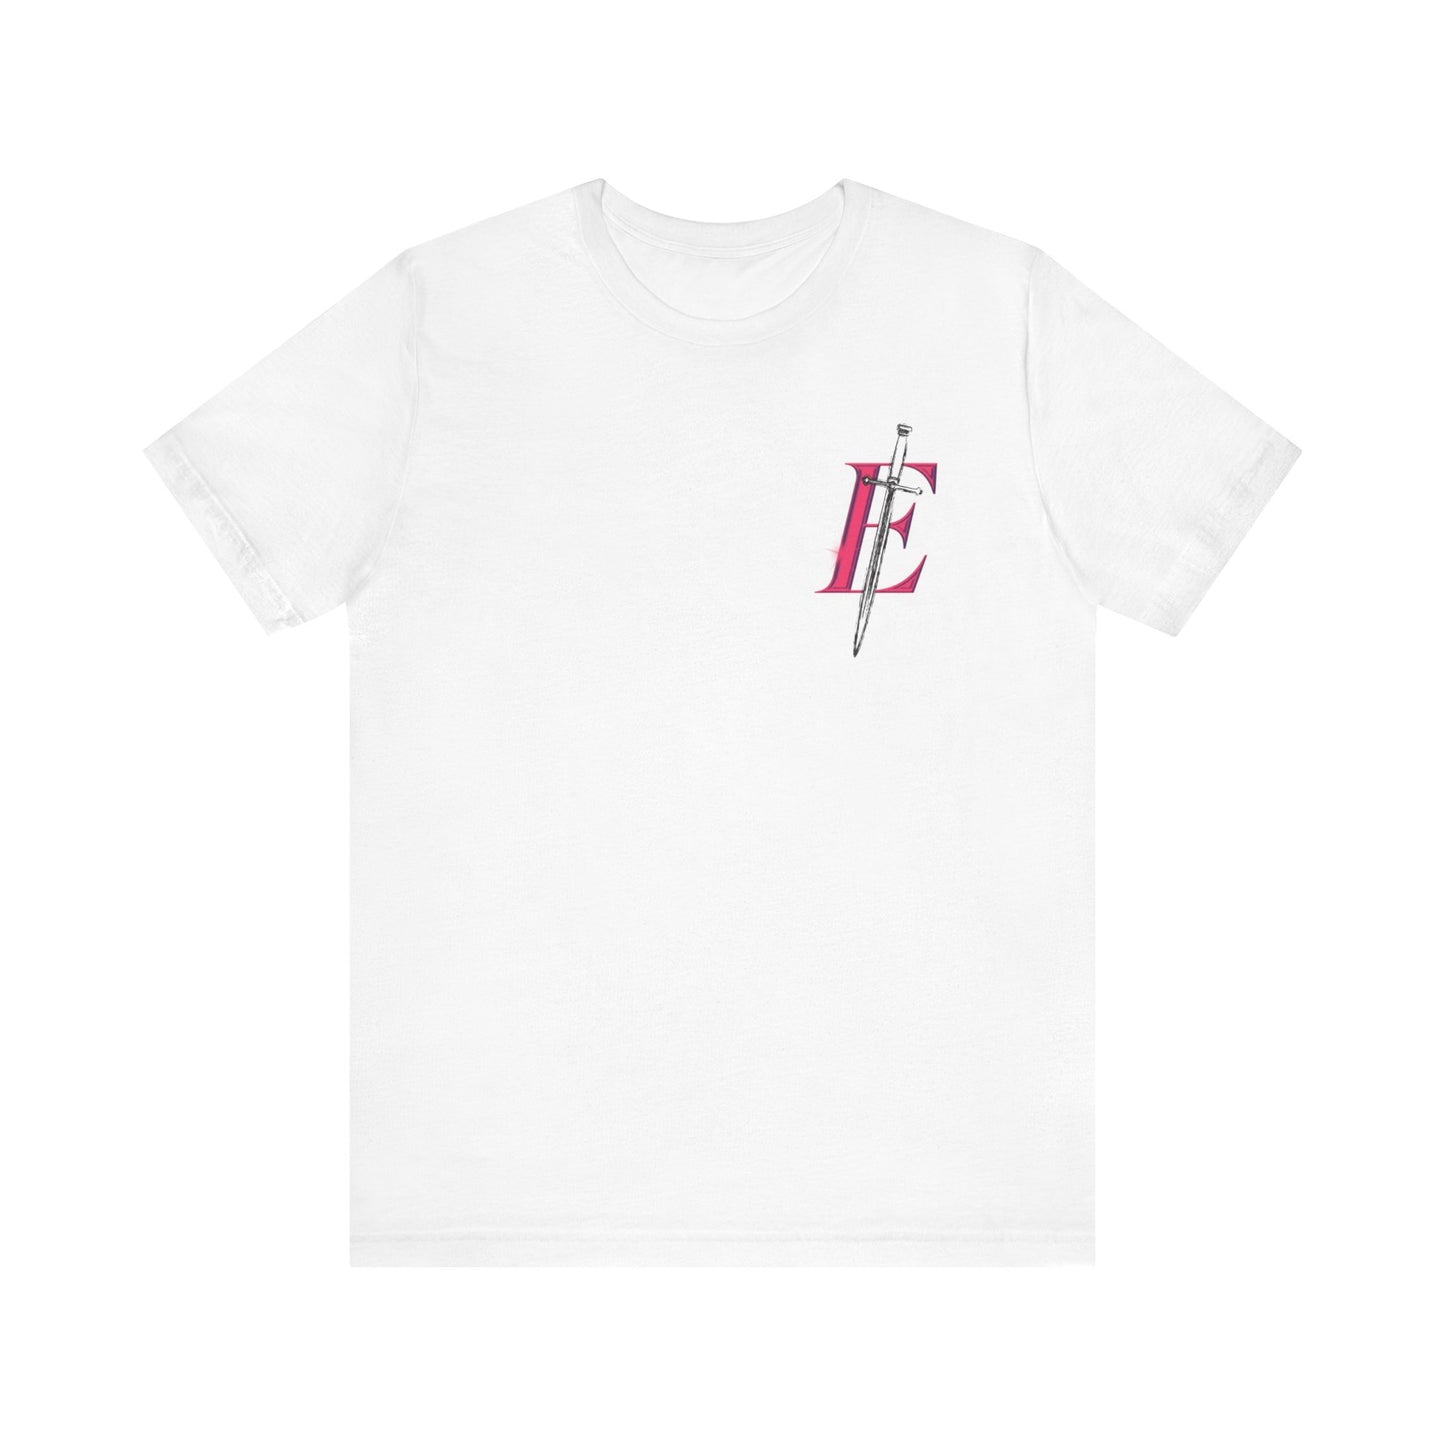 "1of1" Graphic T-Shirt